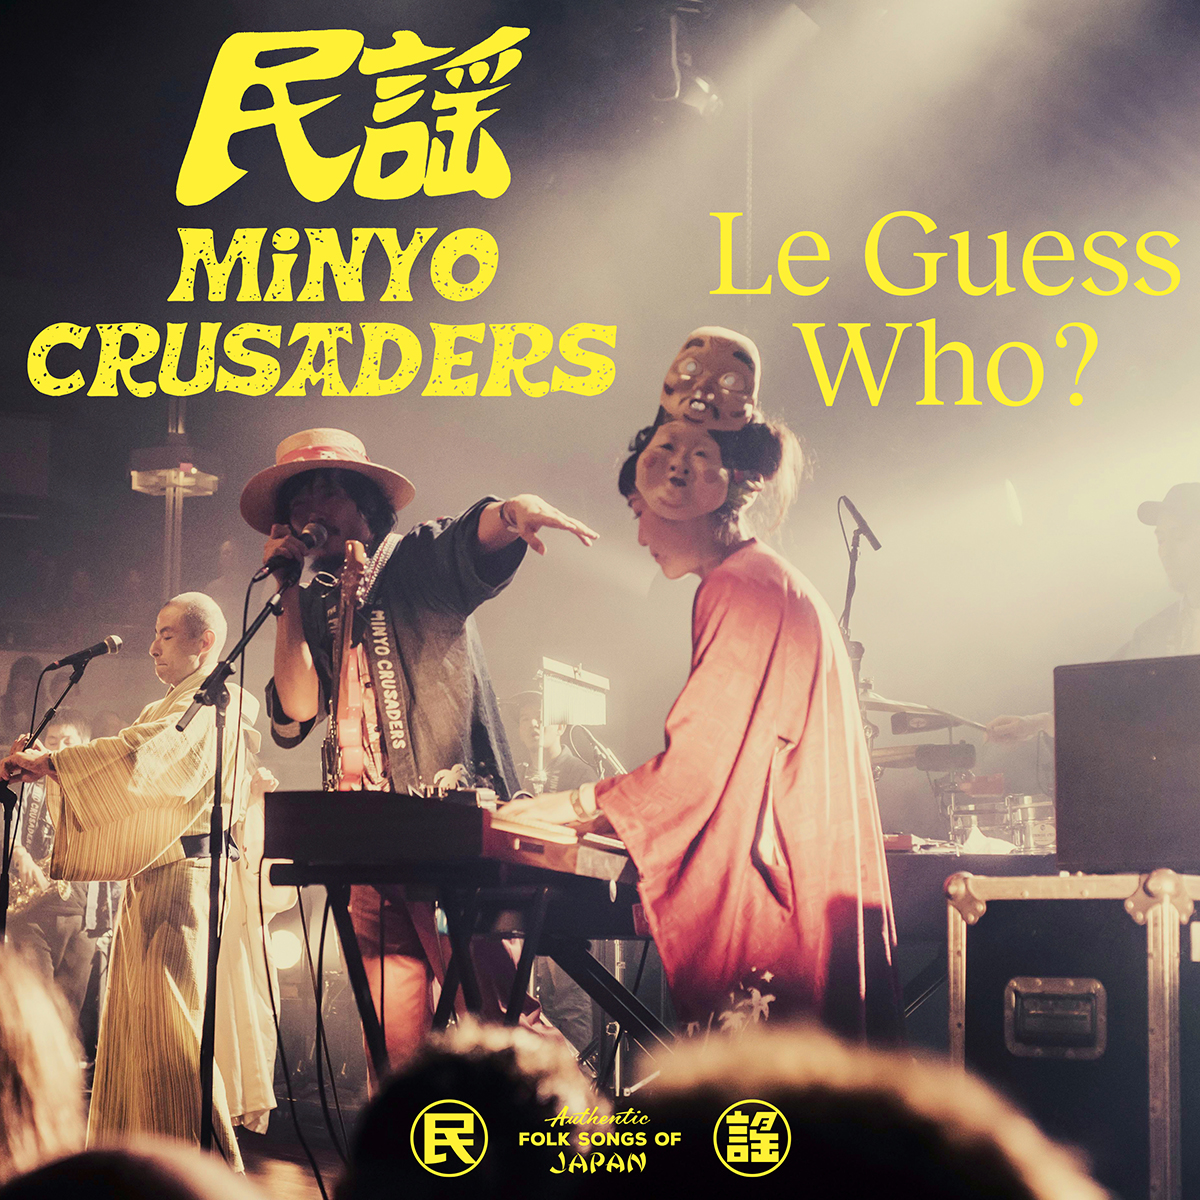 Minyo Crusaders release 'Live at Le Guess Who?' album